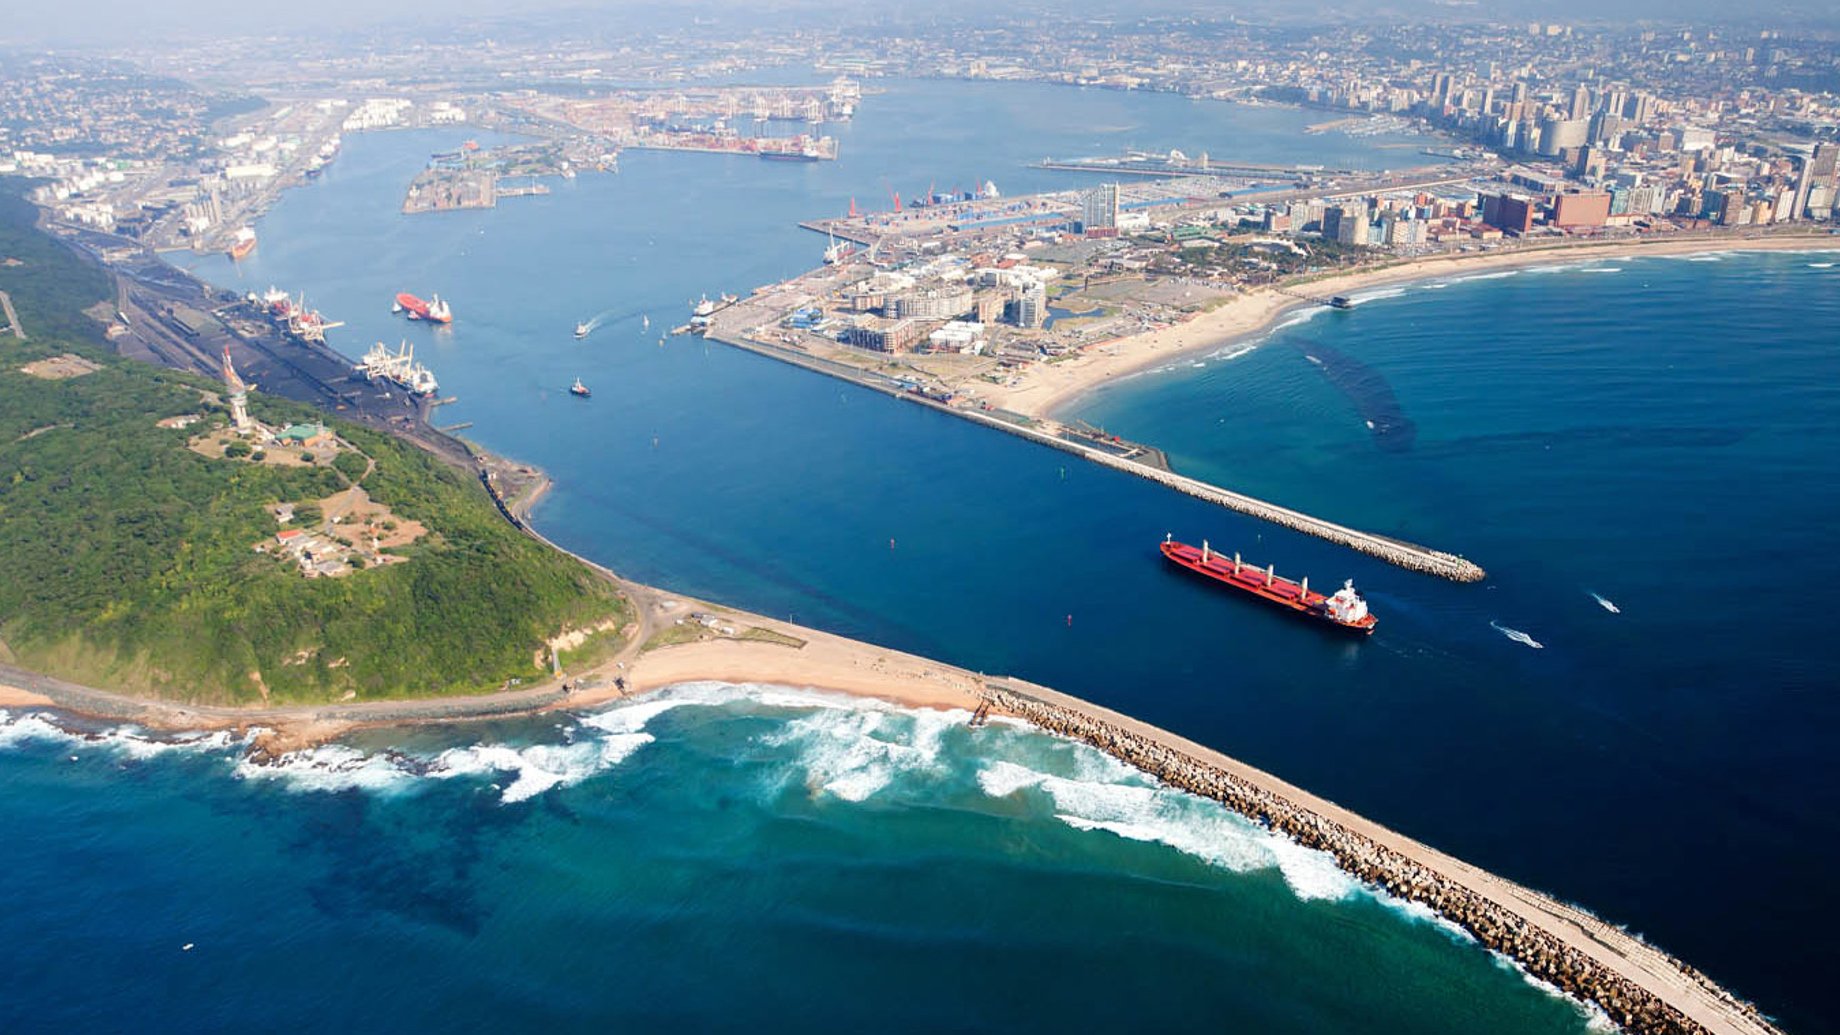 Aerial view of a ship arriving in a port